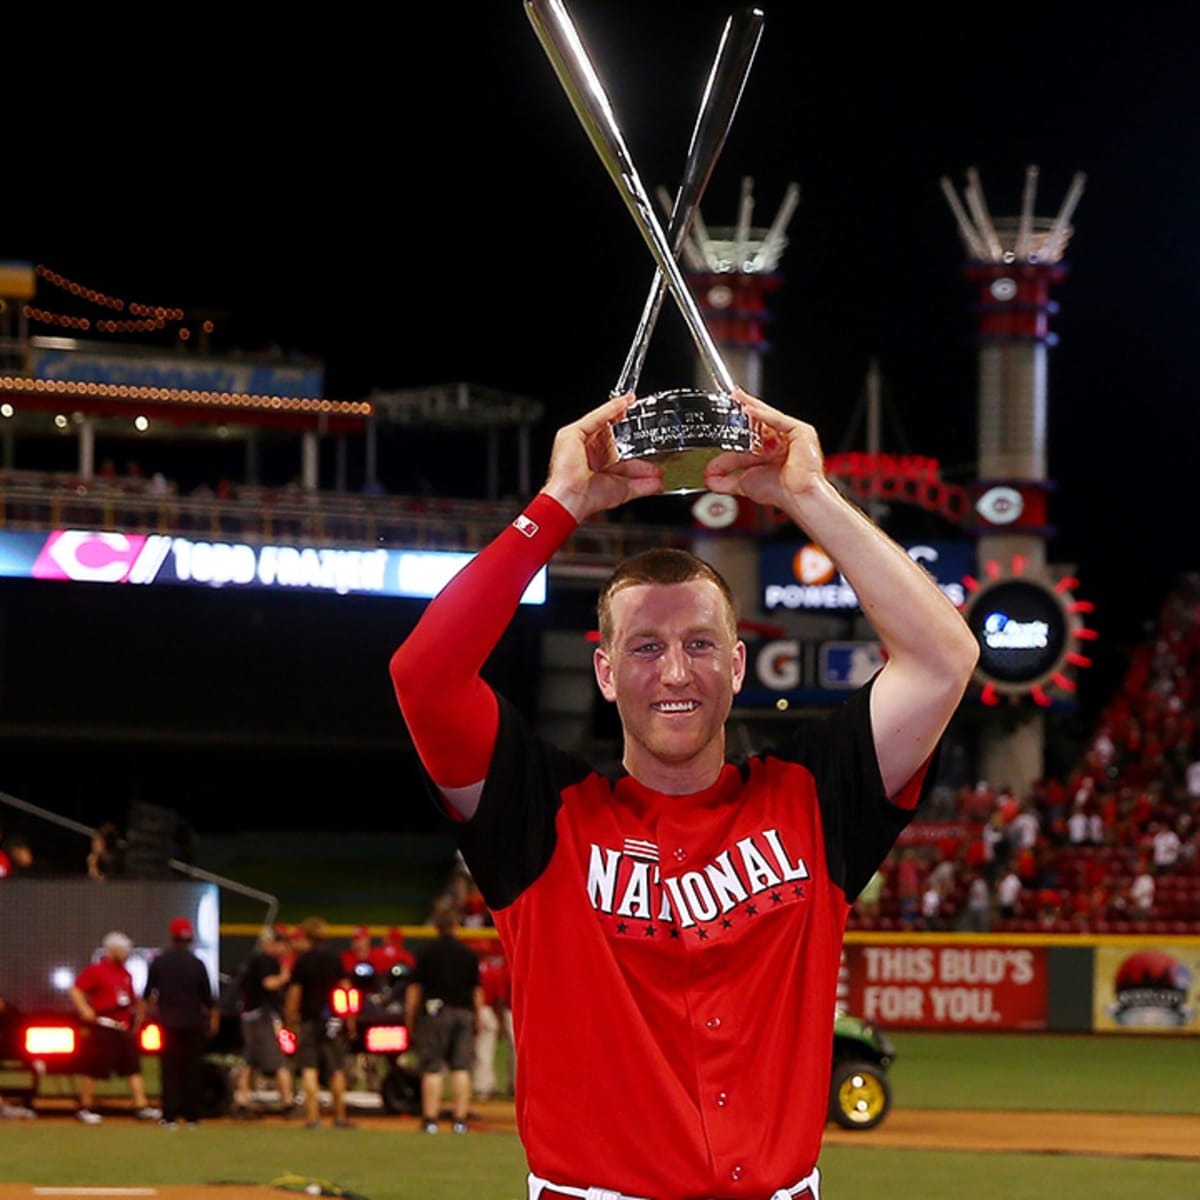 Todd Frazier wins 2015 Home Run Derby - Sports Illustrated